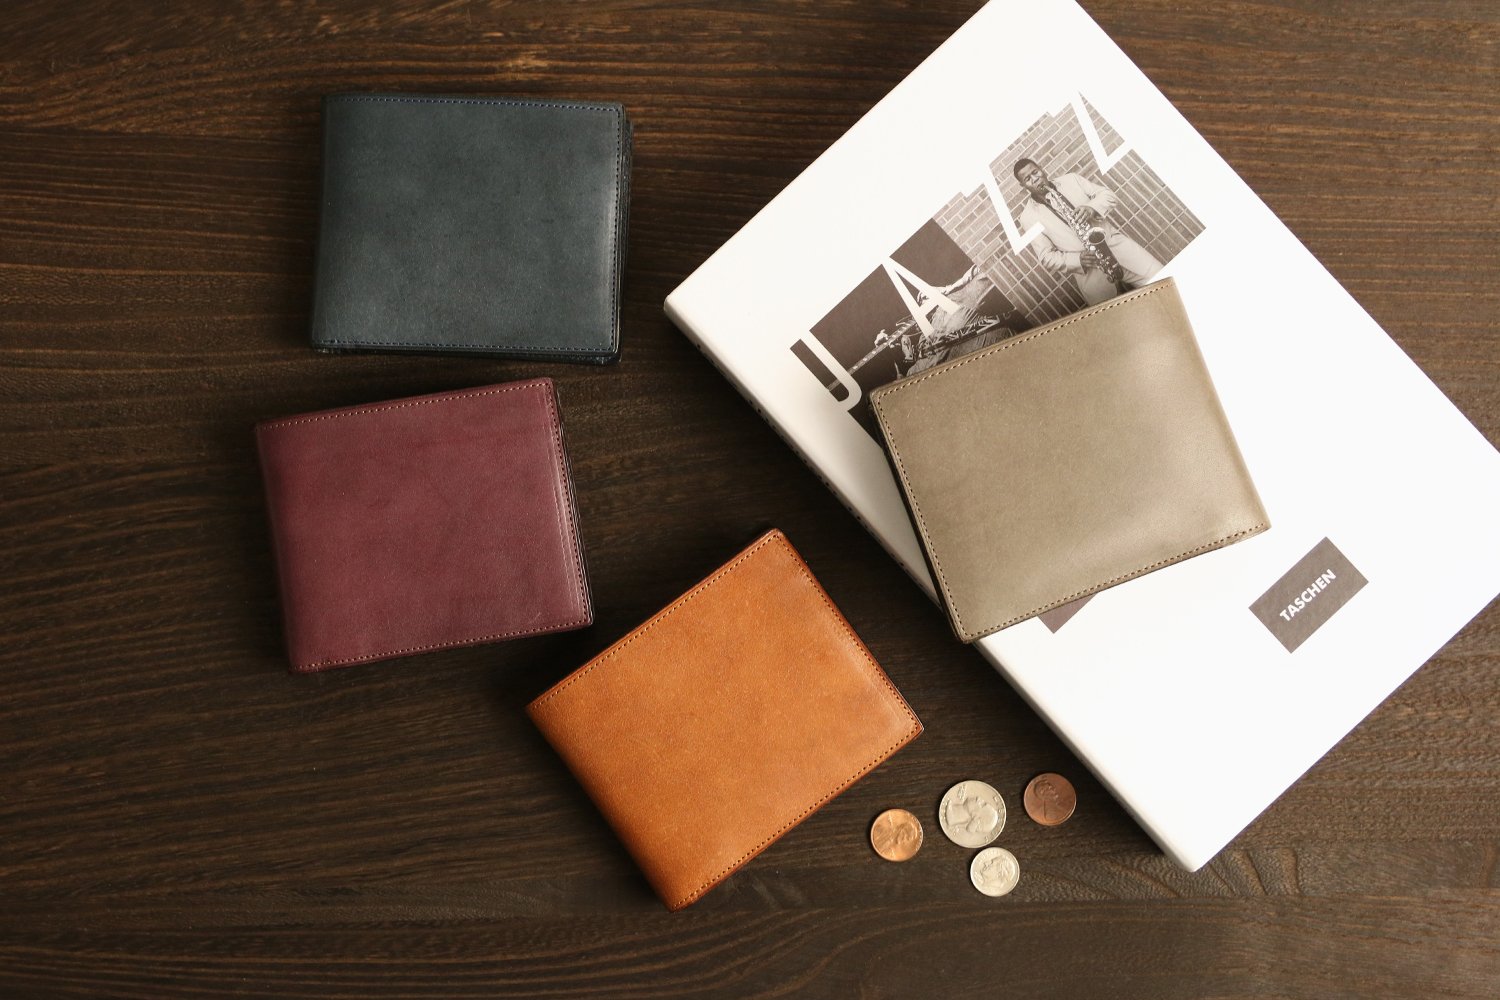 asumederu / ROROMA A bi-fold wallet made of pure domestic leather "Roroma" whose color deepens the more you use it. 